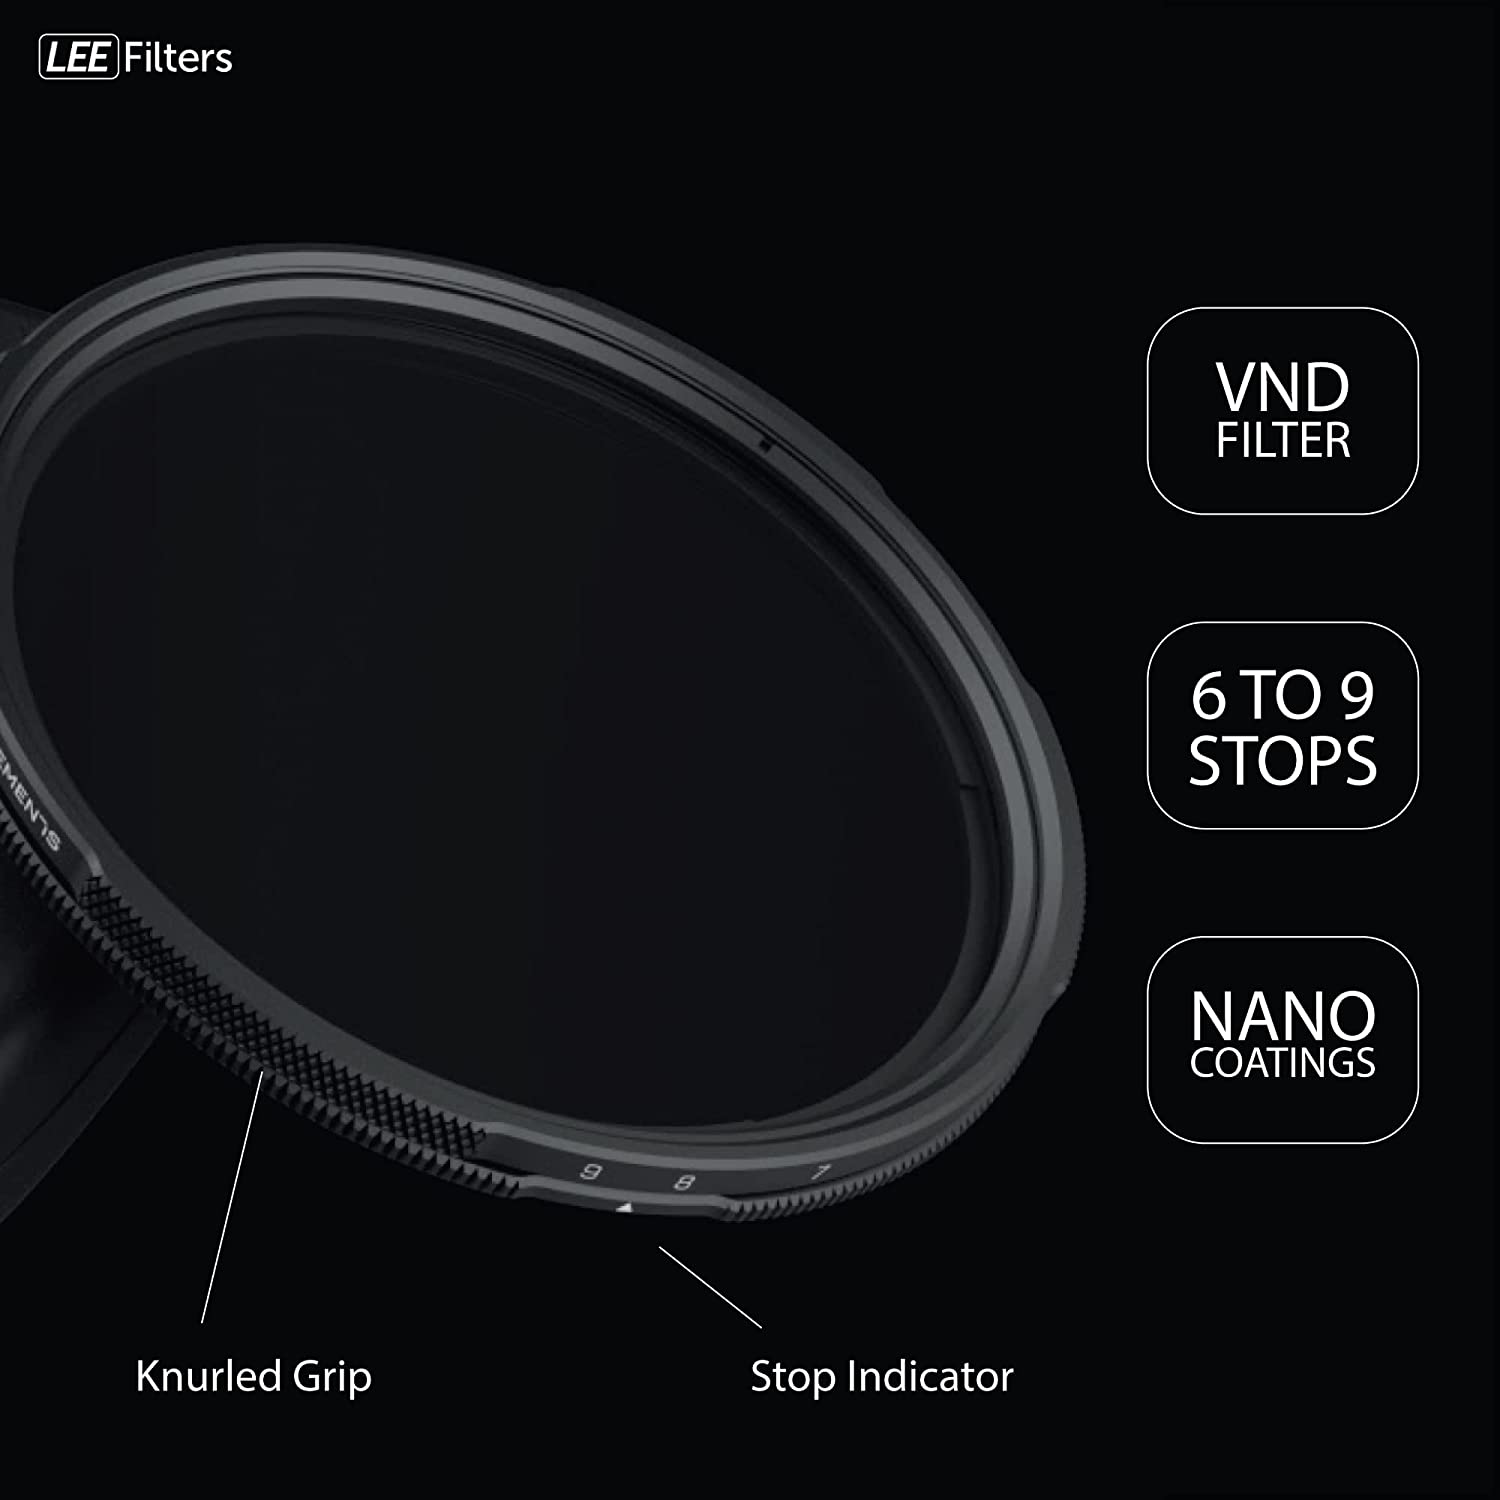 LEE Elements VND Filter, Variable Neutral Density, Featuring 6 to 9 Stops for Mirrorless and DSLR Cameras